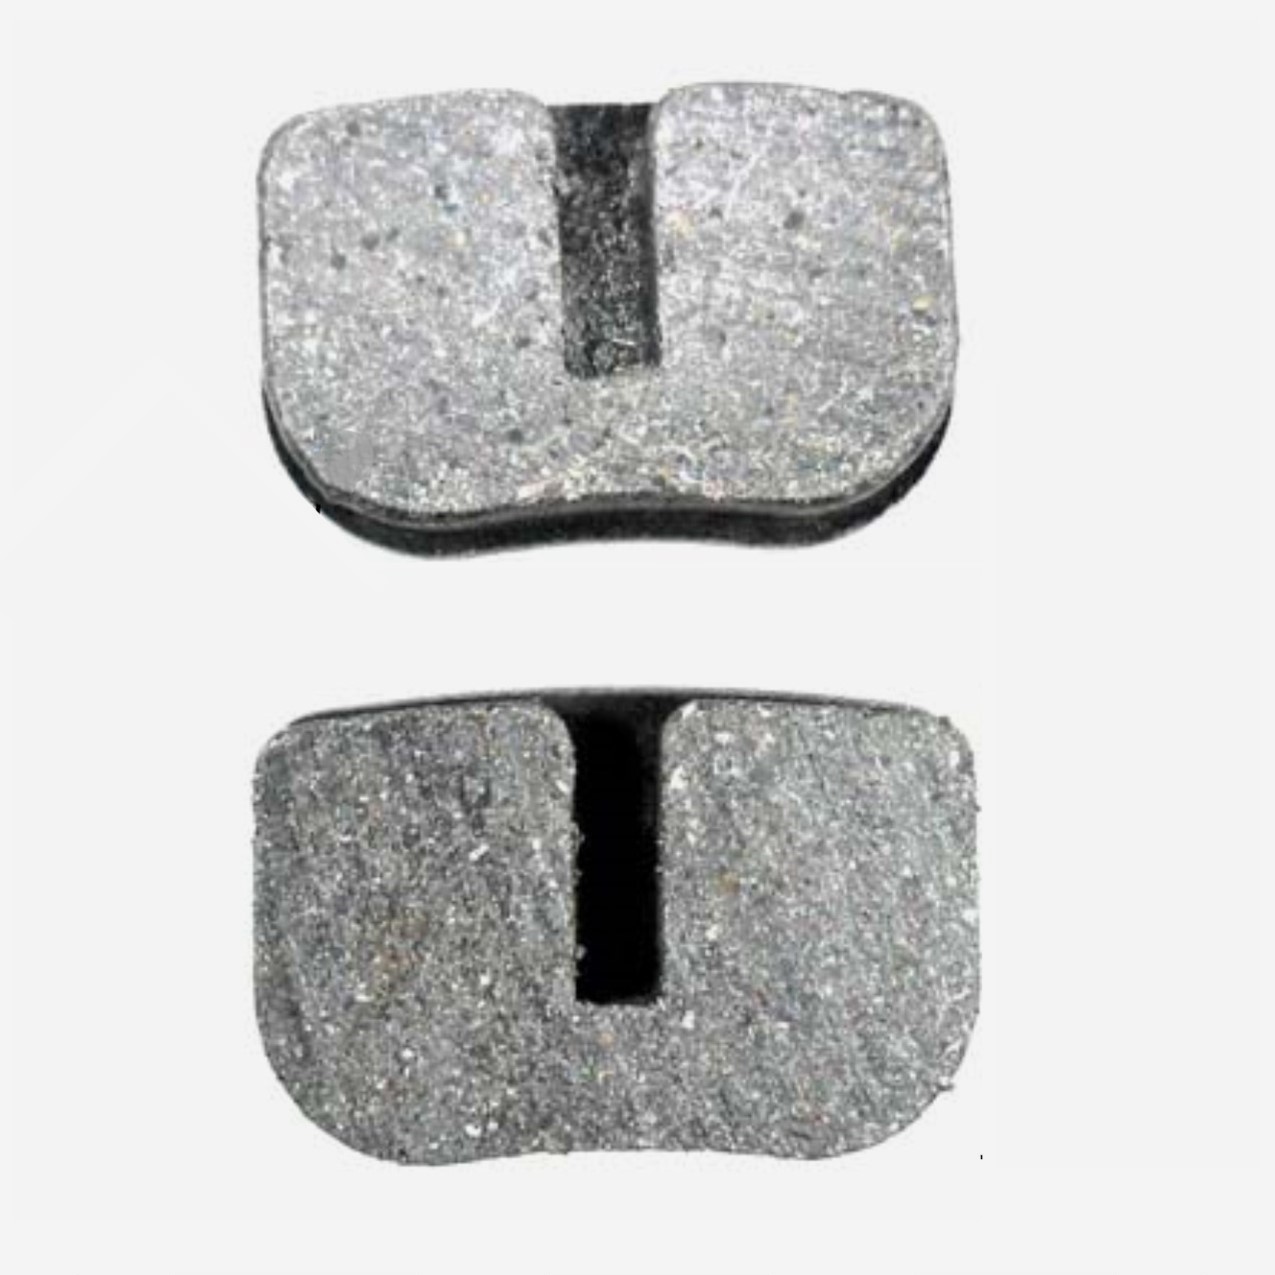 Disc Brake Pads Fits Baja Mini Bikes + Many Other Products 27x17.5x6 Sold Per Set - Click Image to Close